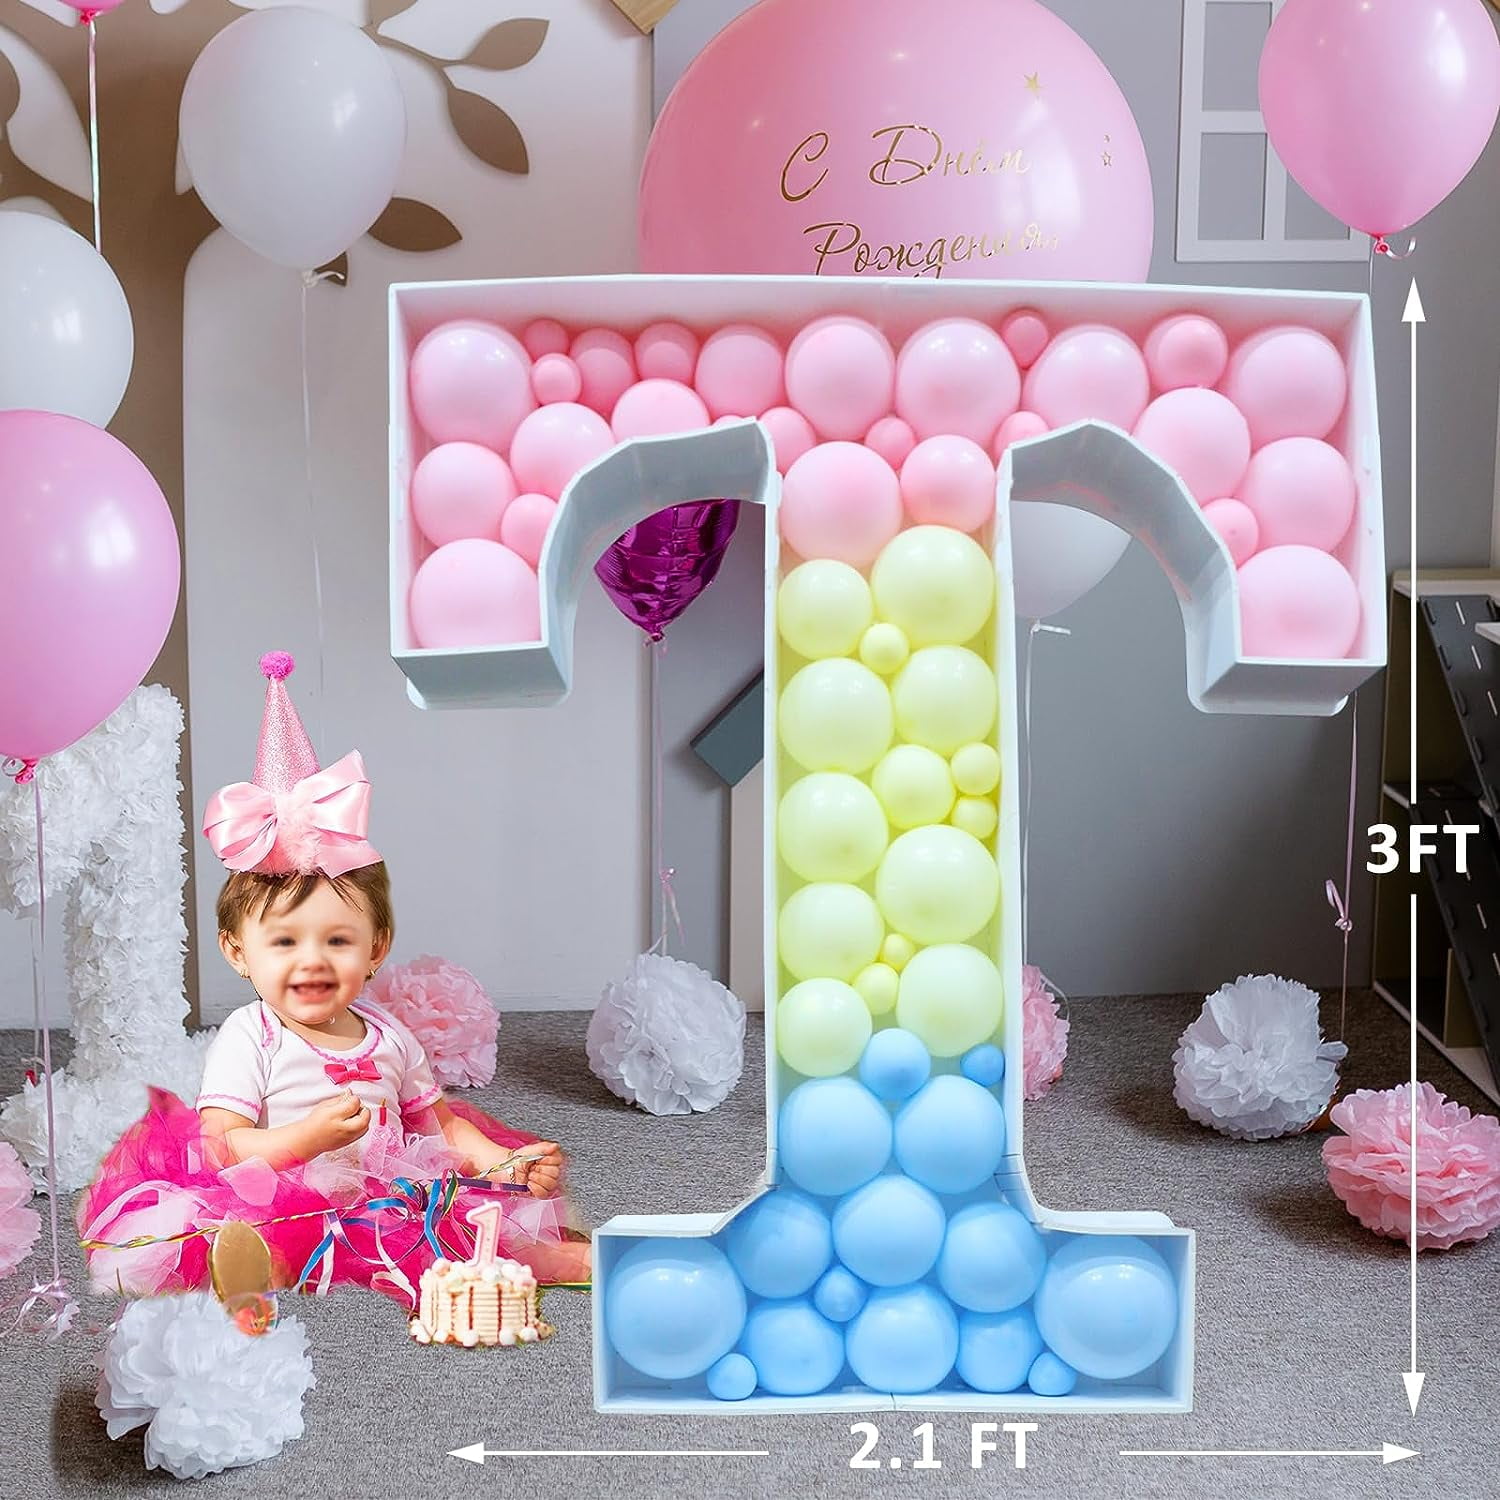 Paper Mache Glitter Letters & Numbers 5.25 x 8.25, Baby's First Birthday,  Cake Smash Decor - Thread